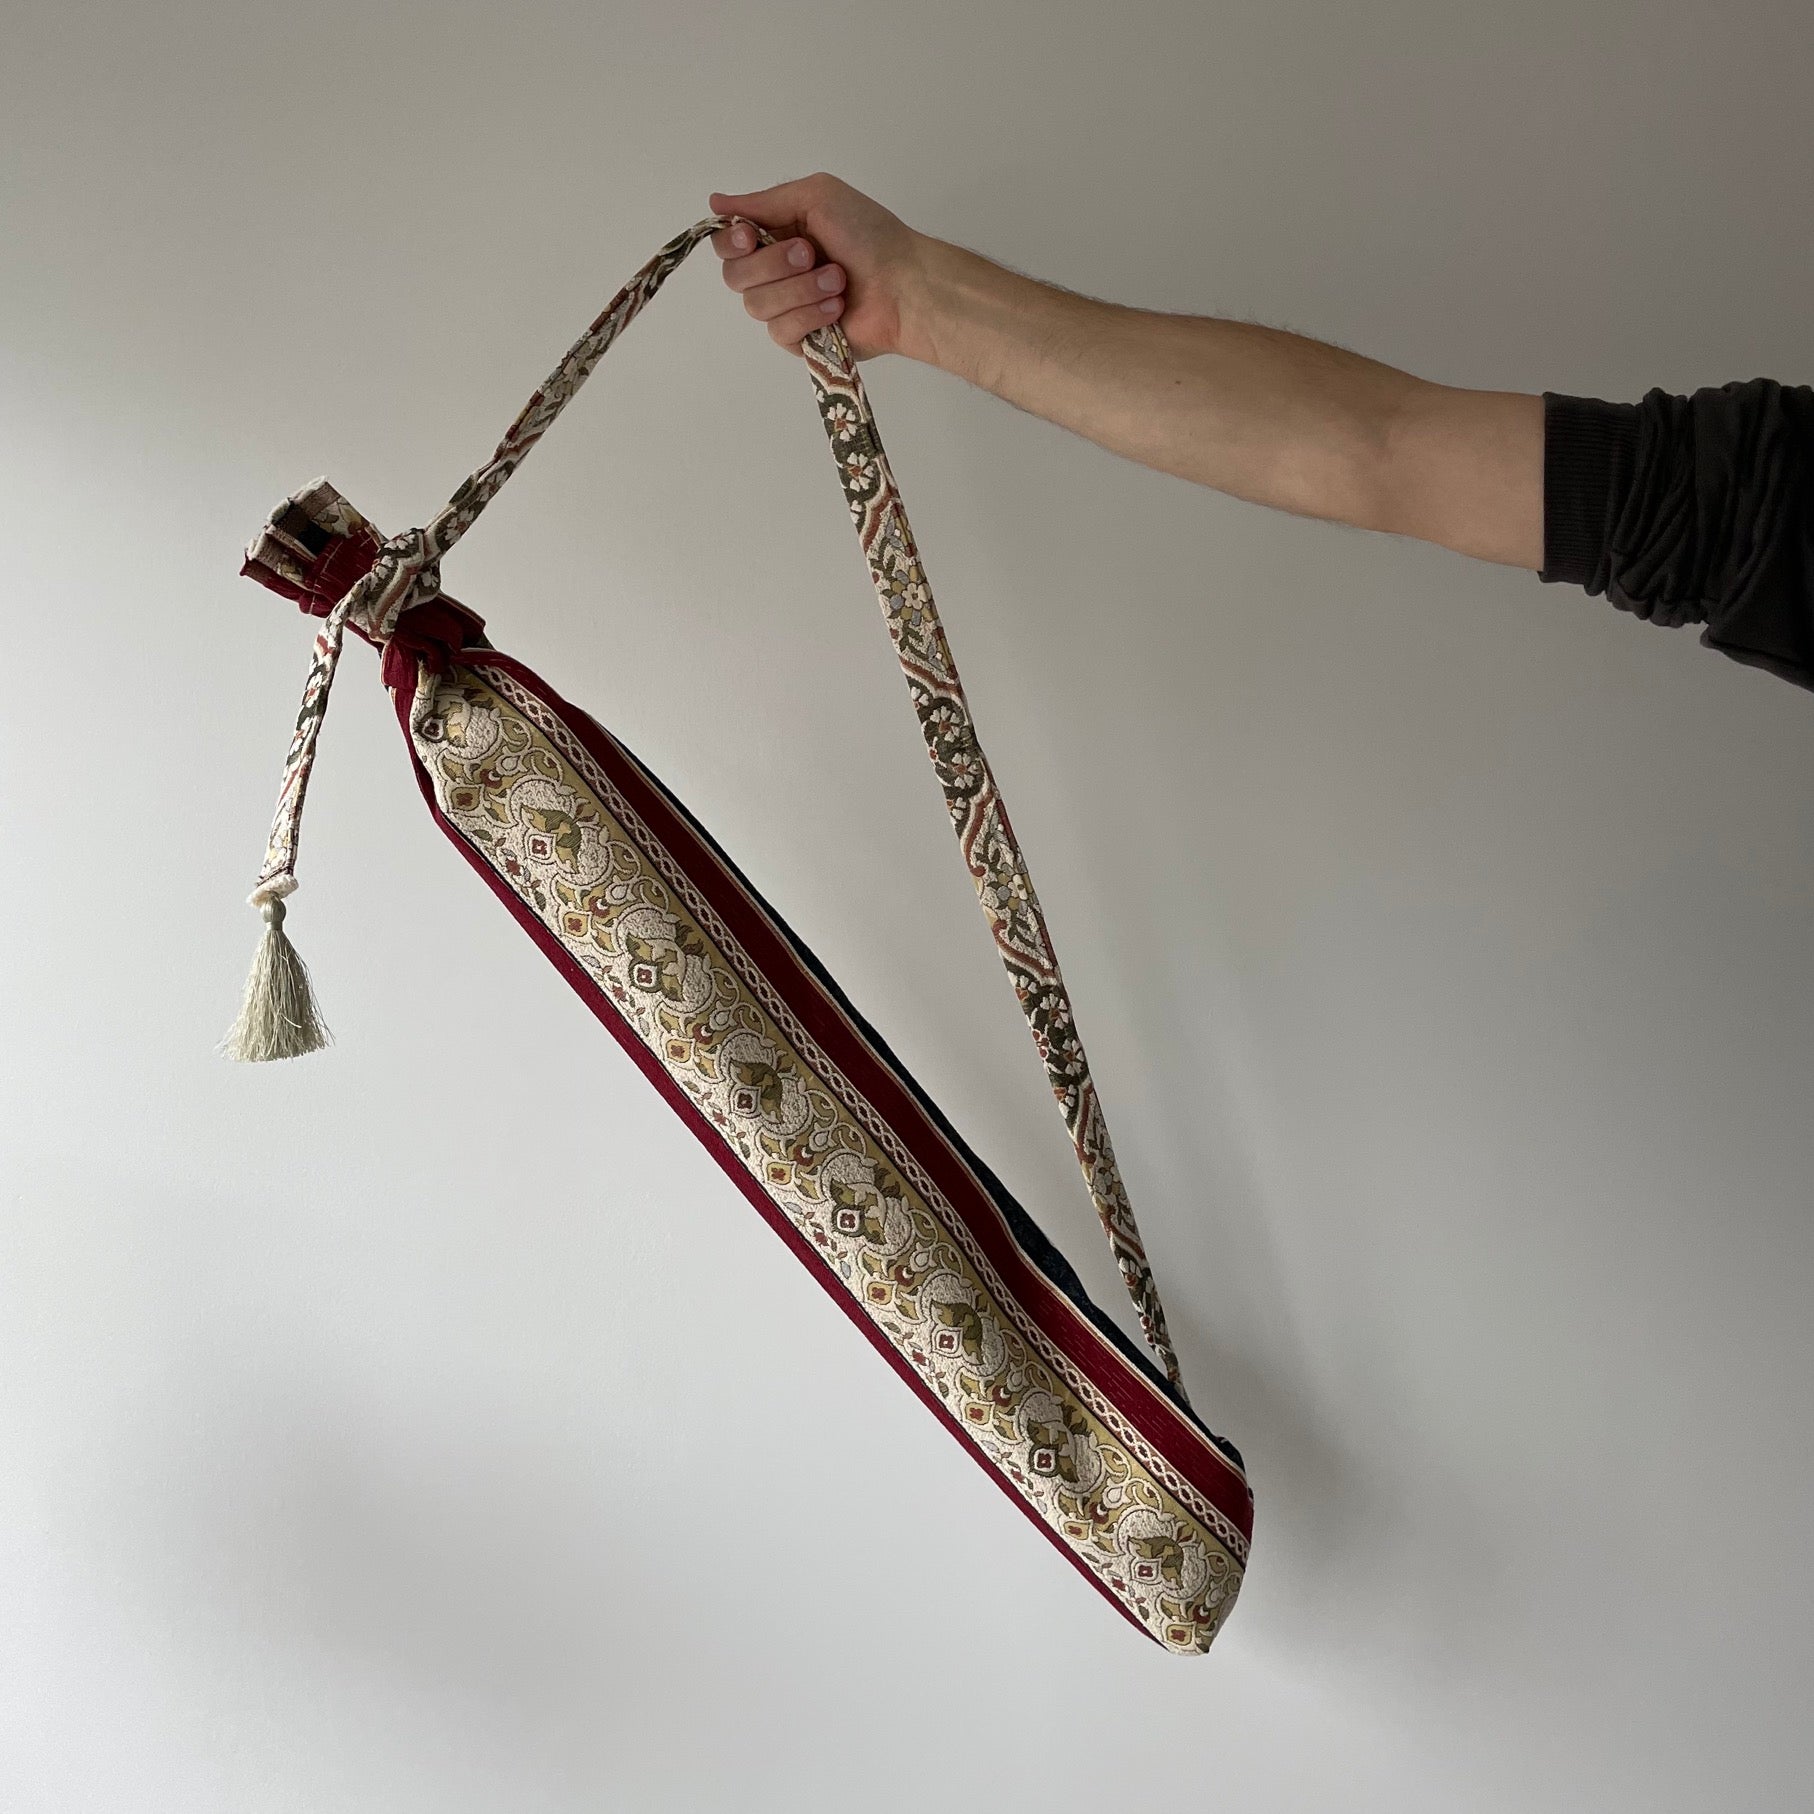 Carrying Flute Bag with Strap for Protection - Flute Bag